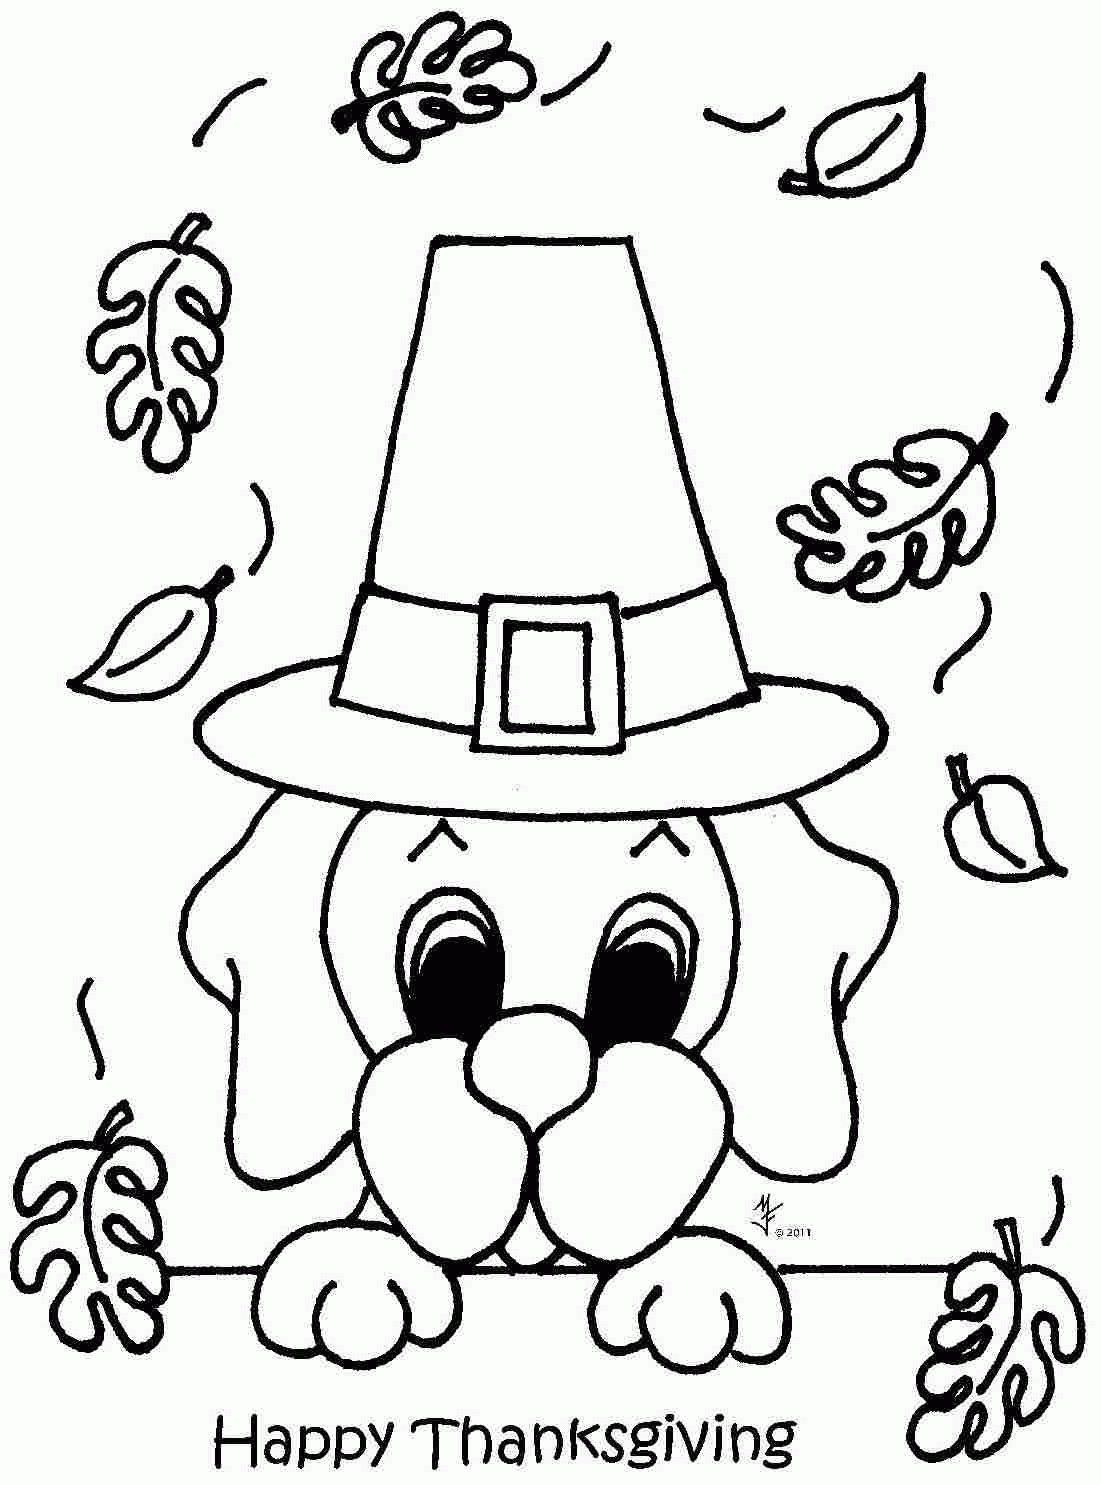 Disney Thanksgiving Coloring Pages - Coloring Page Photos